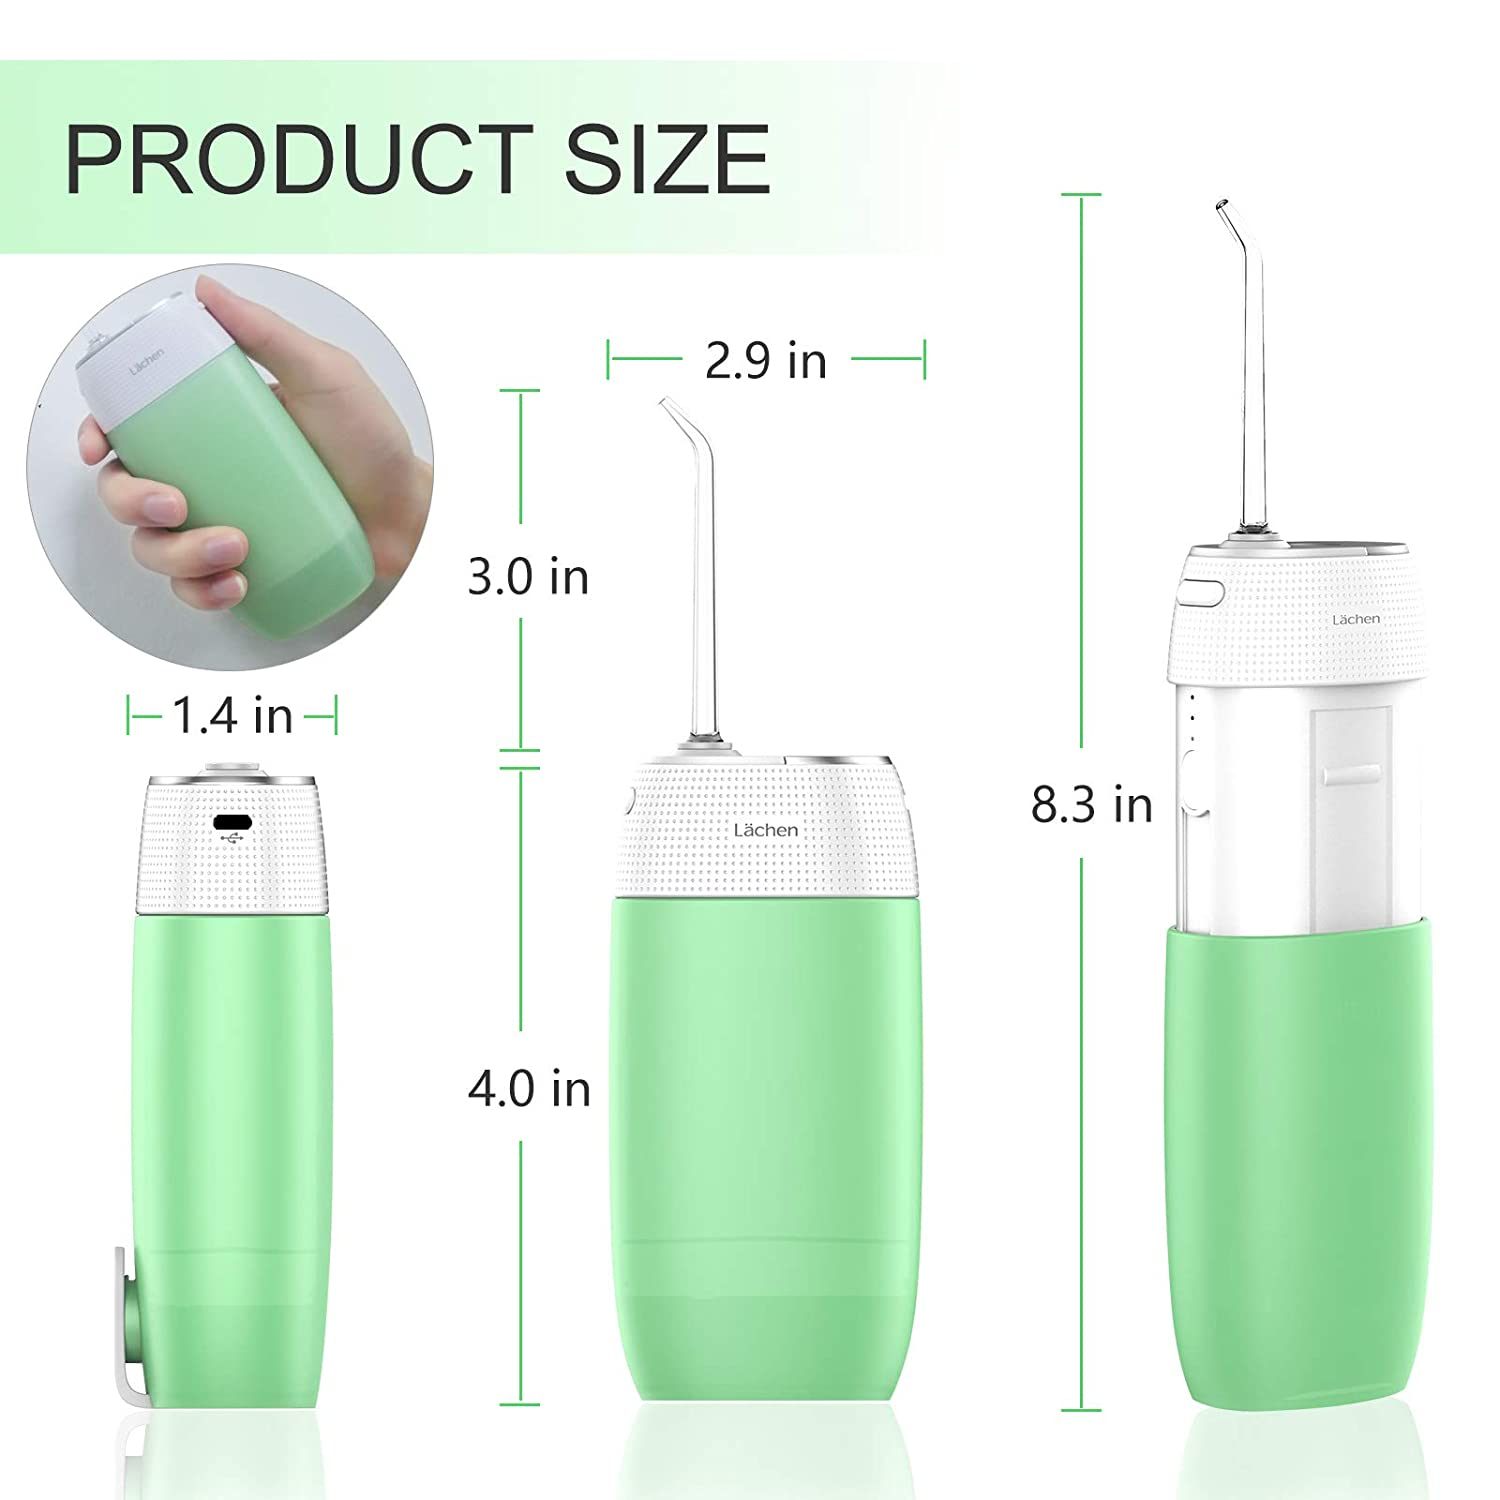 Water Flosser Portable Cordless Dental Oral Irrigator Mini Rechargeable Electric Flossing for Clean Teeth with 3 Modes IPX7 Waterproof for Home Travel Office Braces and Bridges Care Gift by Lächen